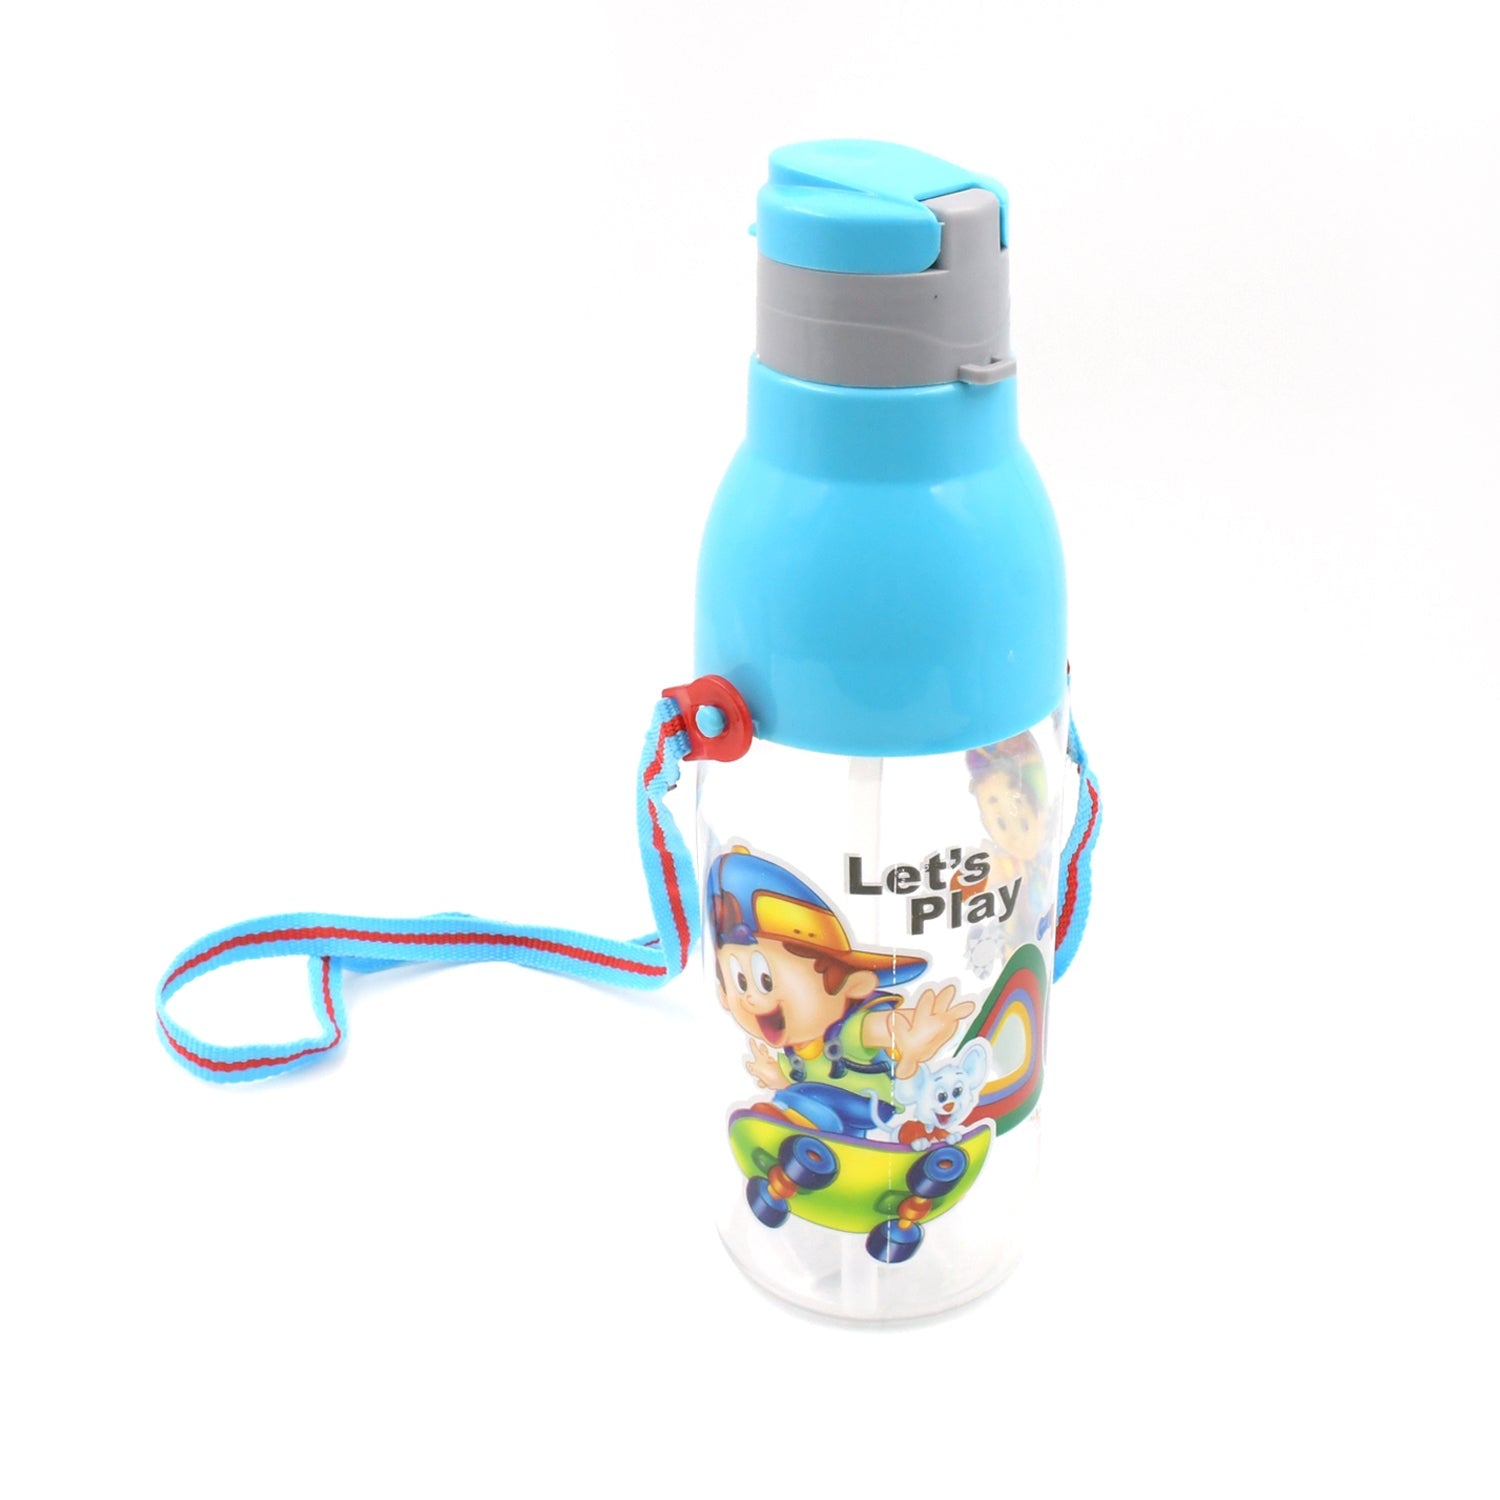 0273 Plastic Tranparent Sports Insulated Water Bottle with Dori & Straw Easy to Carry High Quality Water Bottle, BPA-Free & Leak-Proof! for Kids' School, For Fridge, Office, Sports, School, Gym, Yoga (1 Pc 900ML)